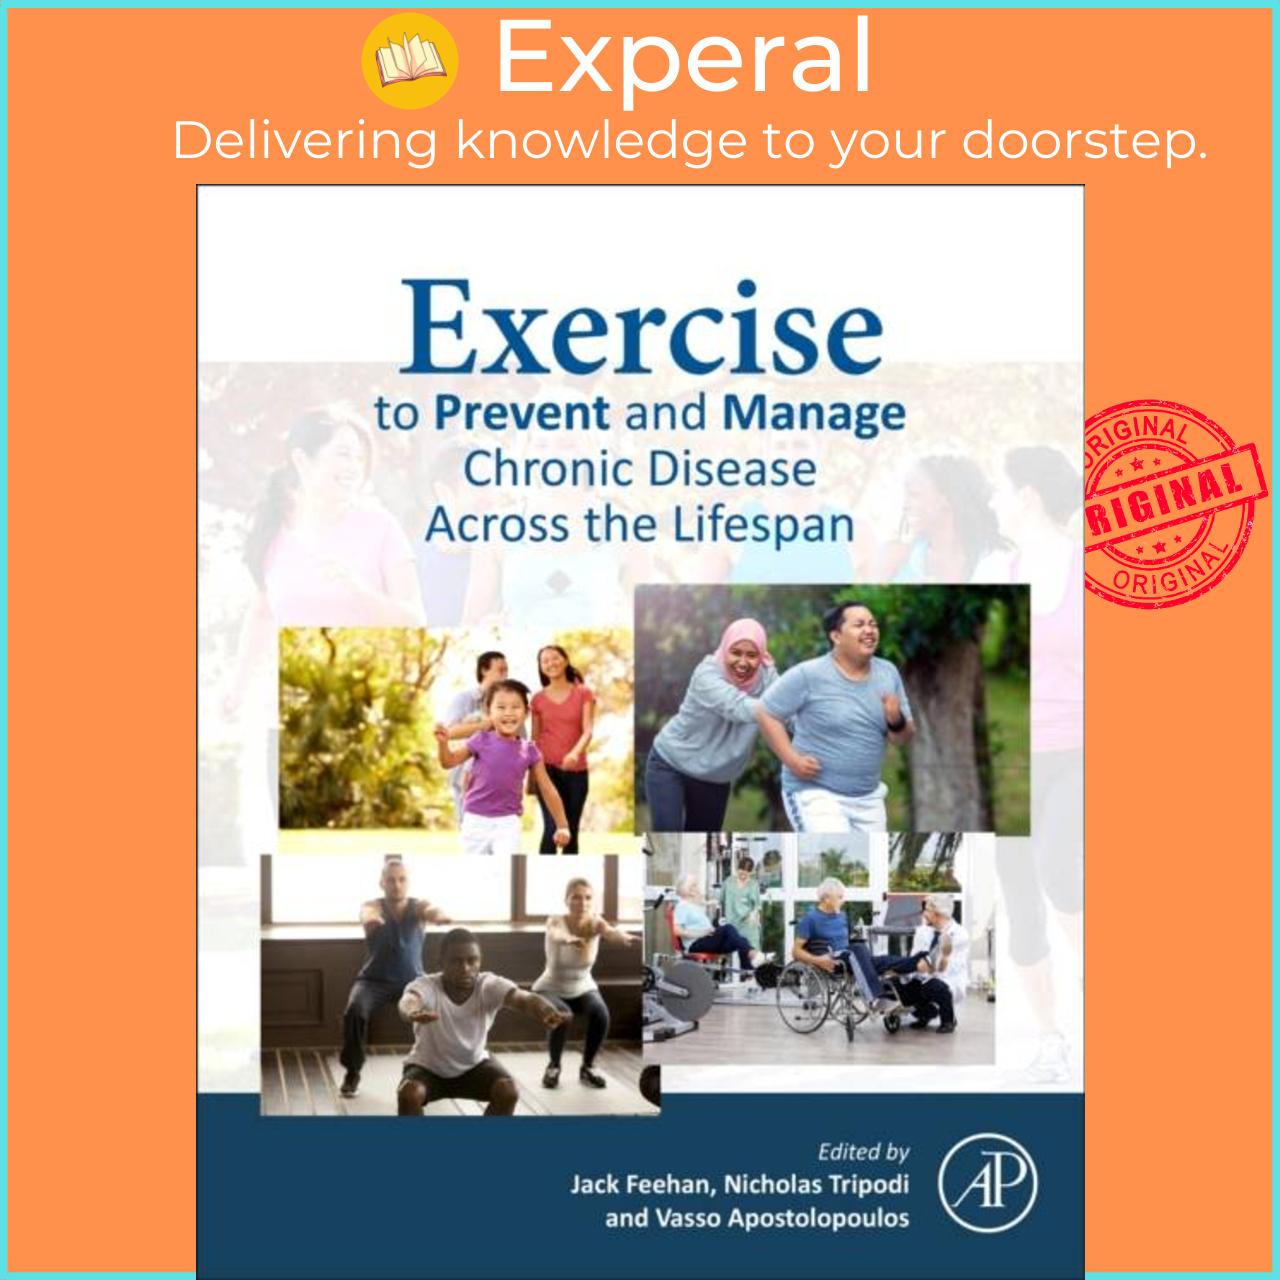 Sách - Exercise to Prevent and Manage Chronic Disease Across the Lifespan by Nicholas Tripodi (UK edition, paperback)